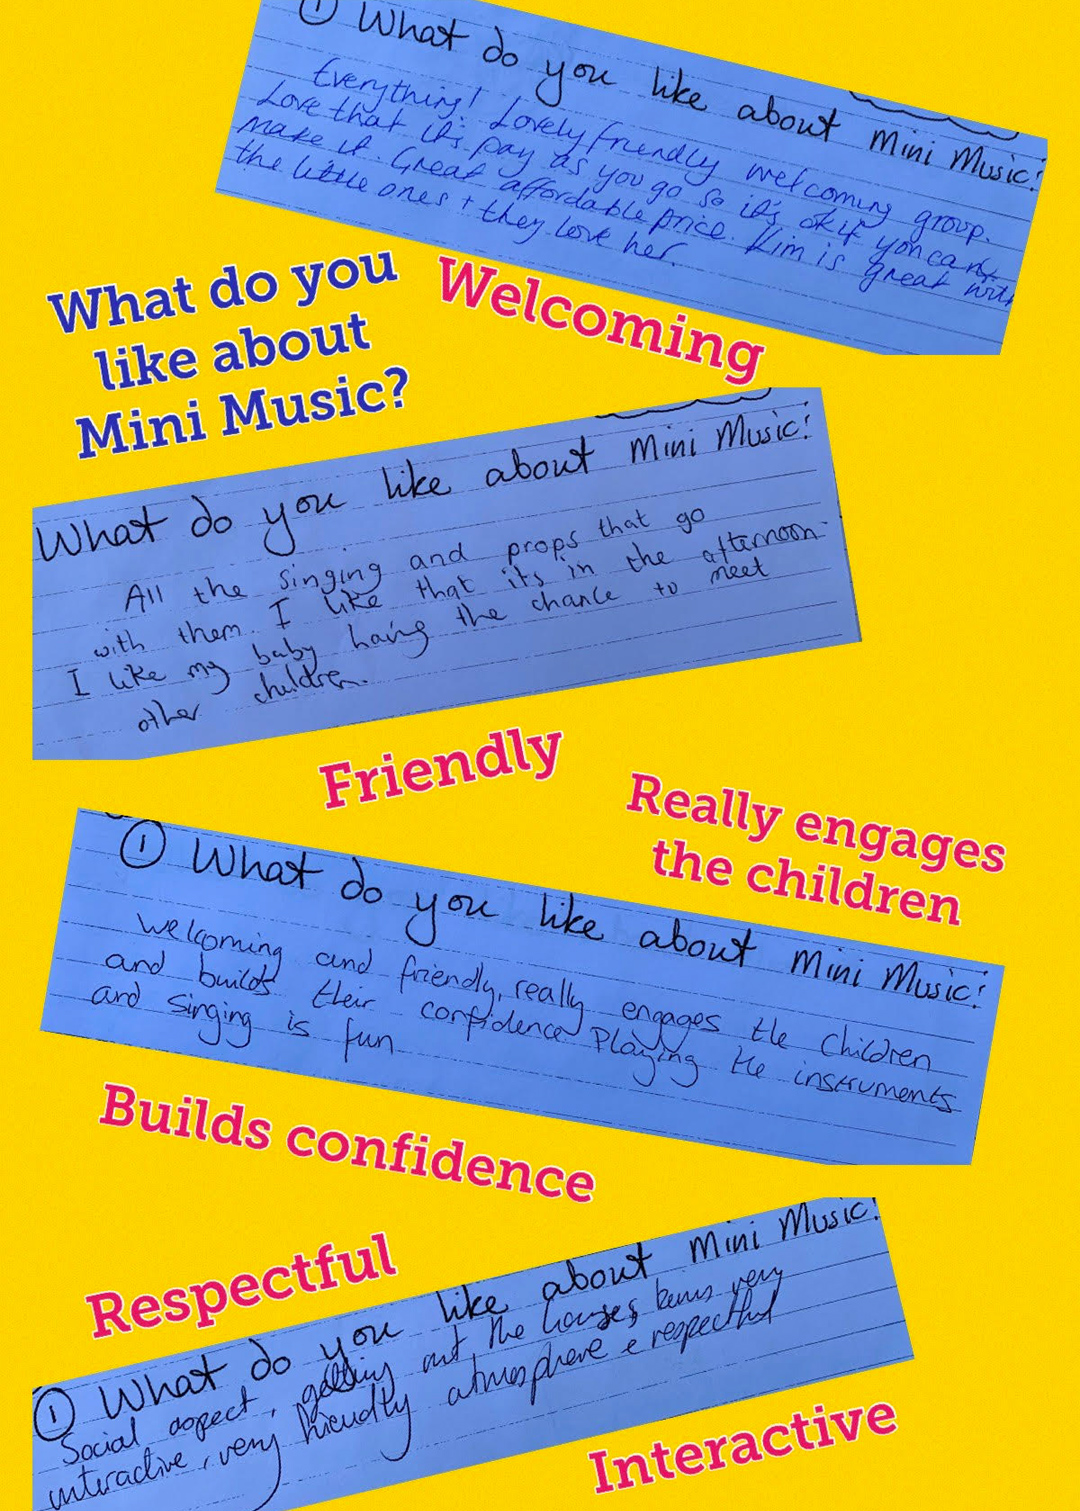 A frieze shows comments made by Mini Music carers. They say things like "lovely, friendly, welcoming group" and "really engages the children and builds their confidence"